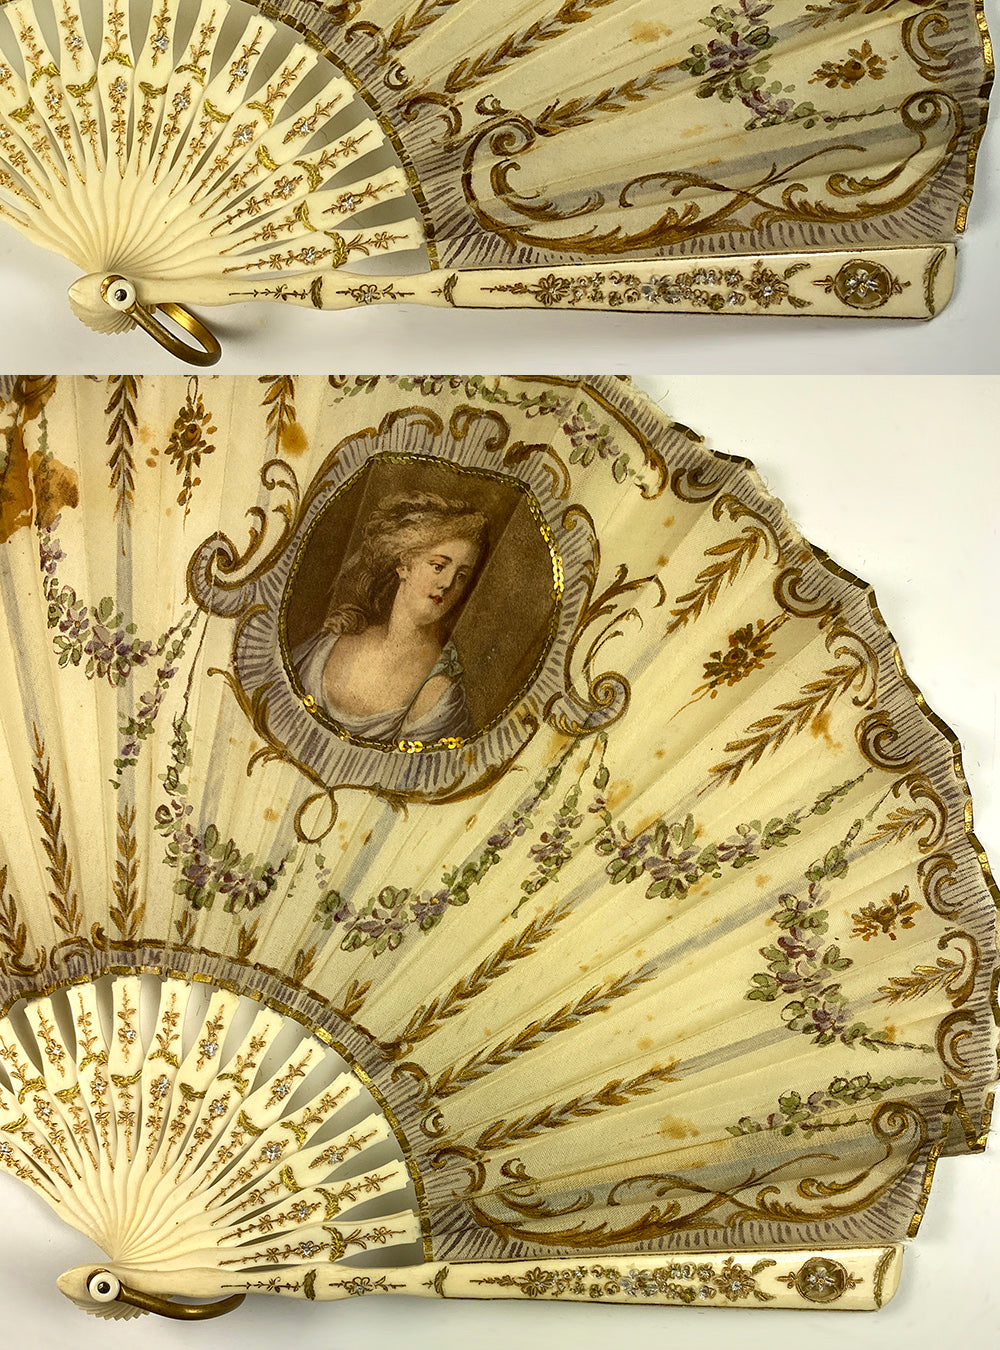 Antique French Forme Ballon Hand Fan, Hand Painted Silk by Ernest Rees, c.1890-1910, Paris